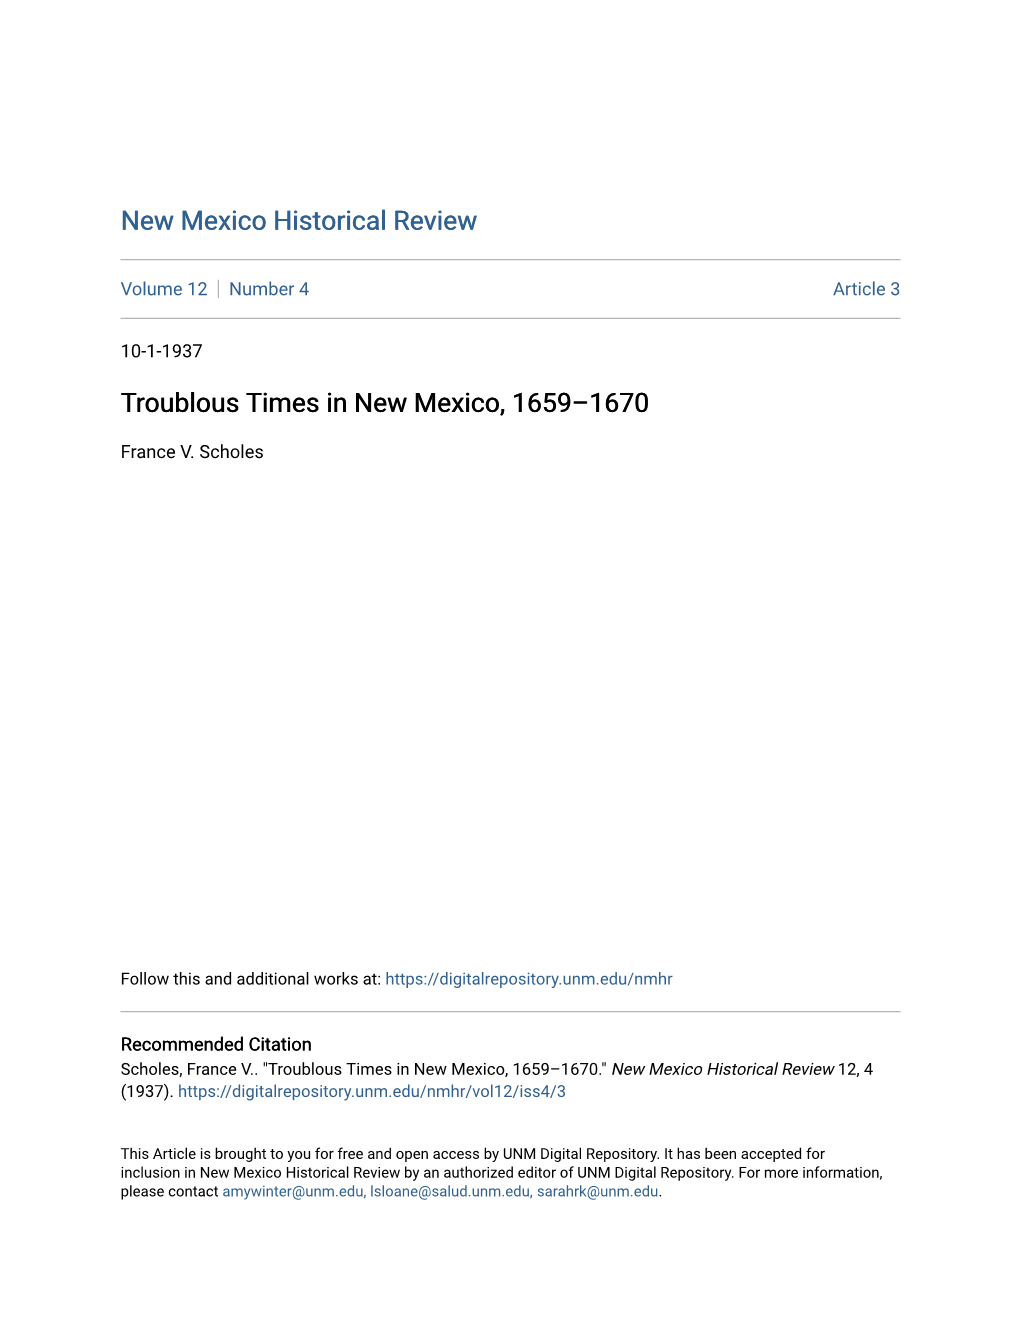 Troublous Times in New Mexico, 1659Â•Fi1670